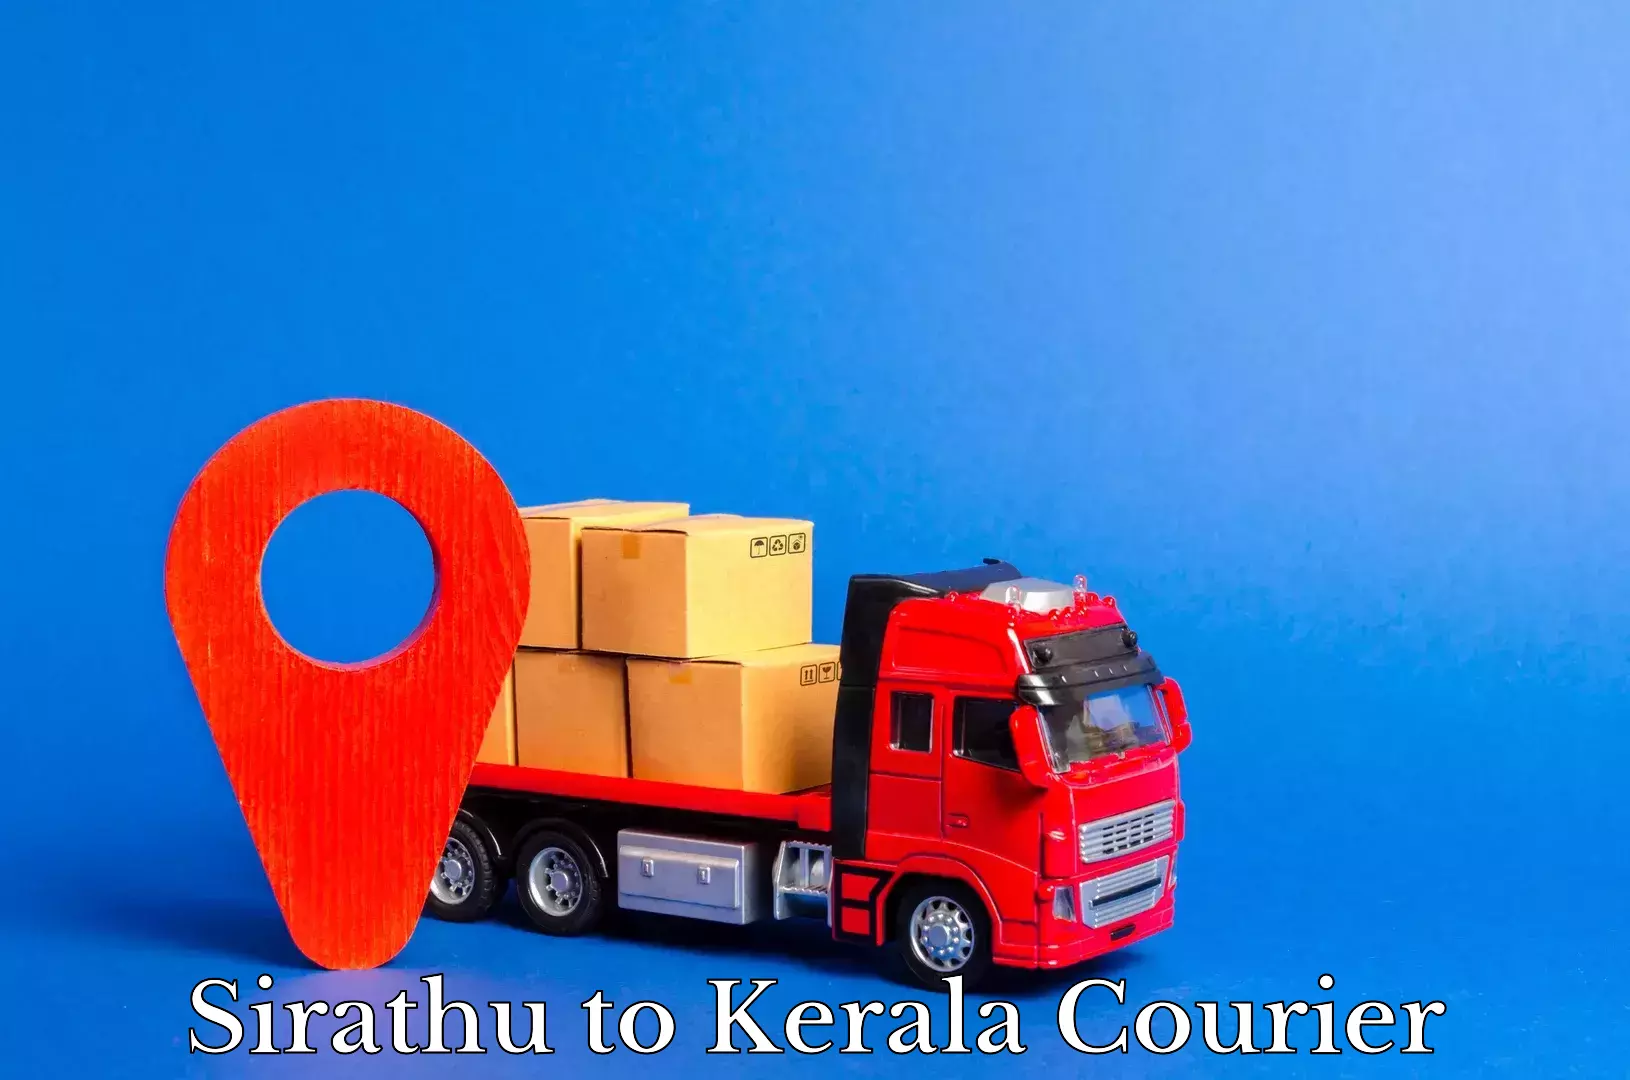 Overnight delivery services Sirathu to Kerala